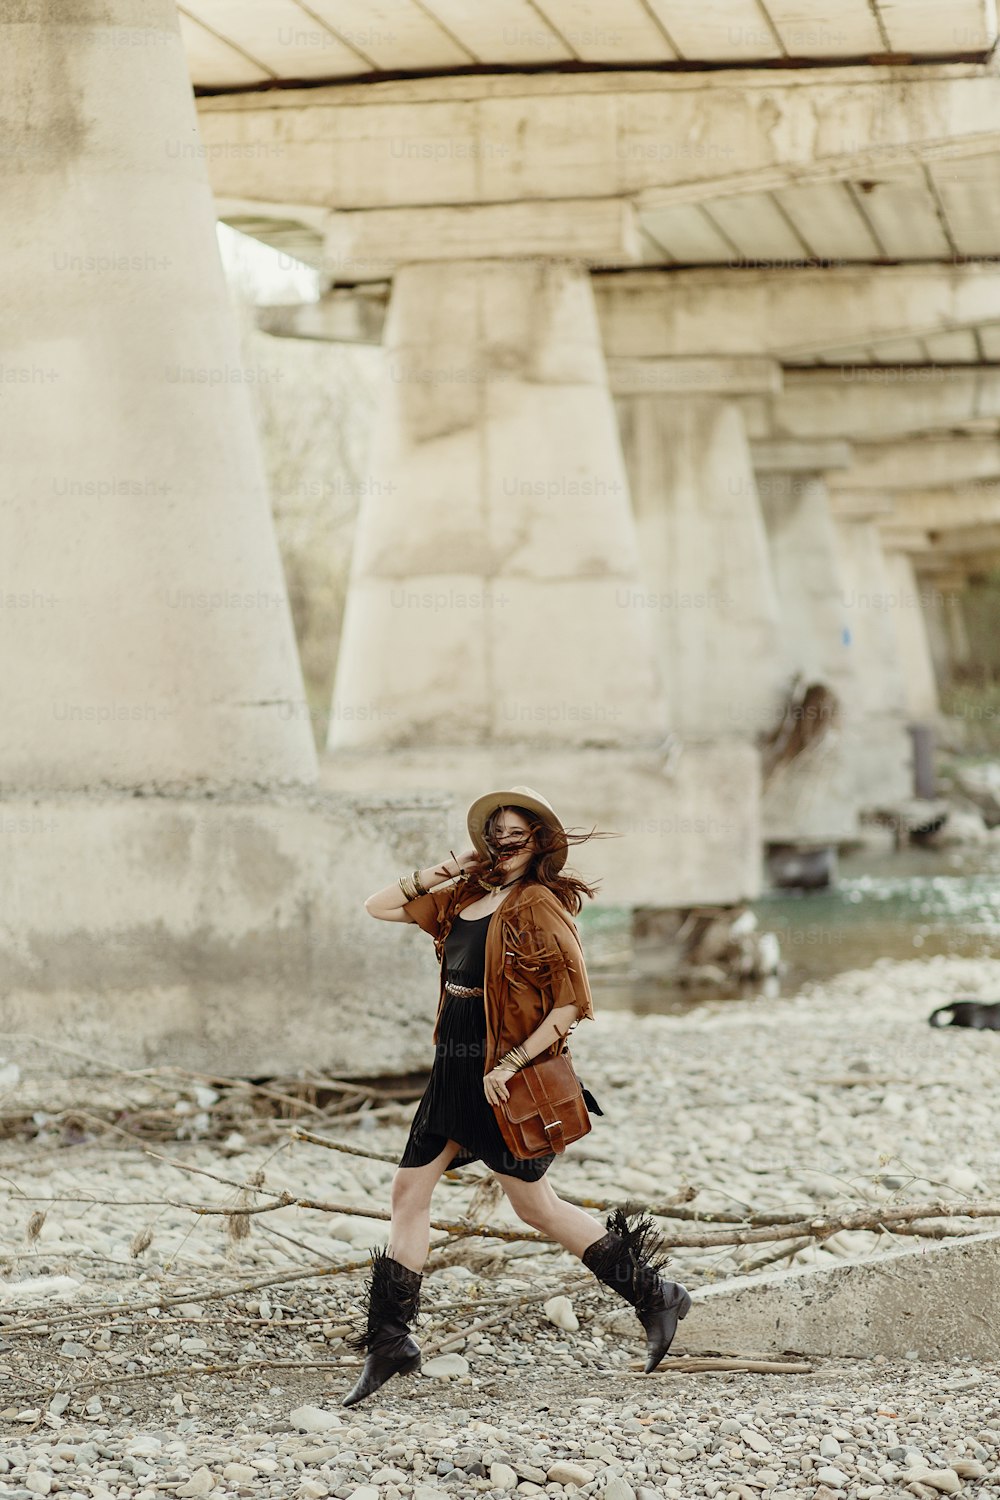 stylish boho woman jumping, having fun, in hat, leather bag, fringe poncho and boots  near river under bridge stone. girl in gypsy hippie look young traveler. summer travel